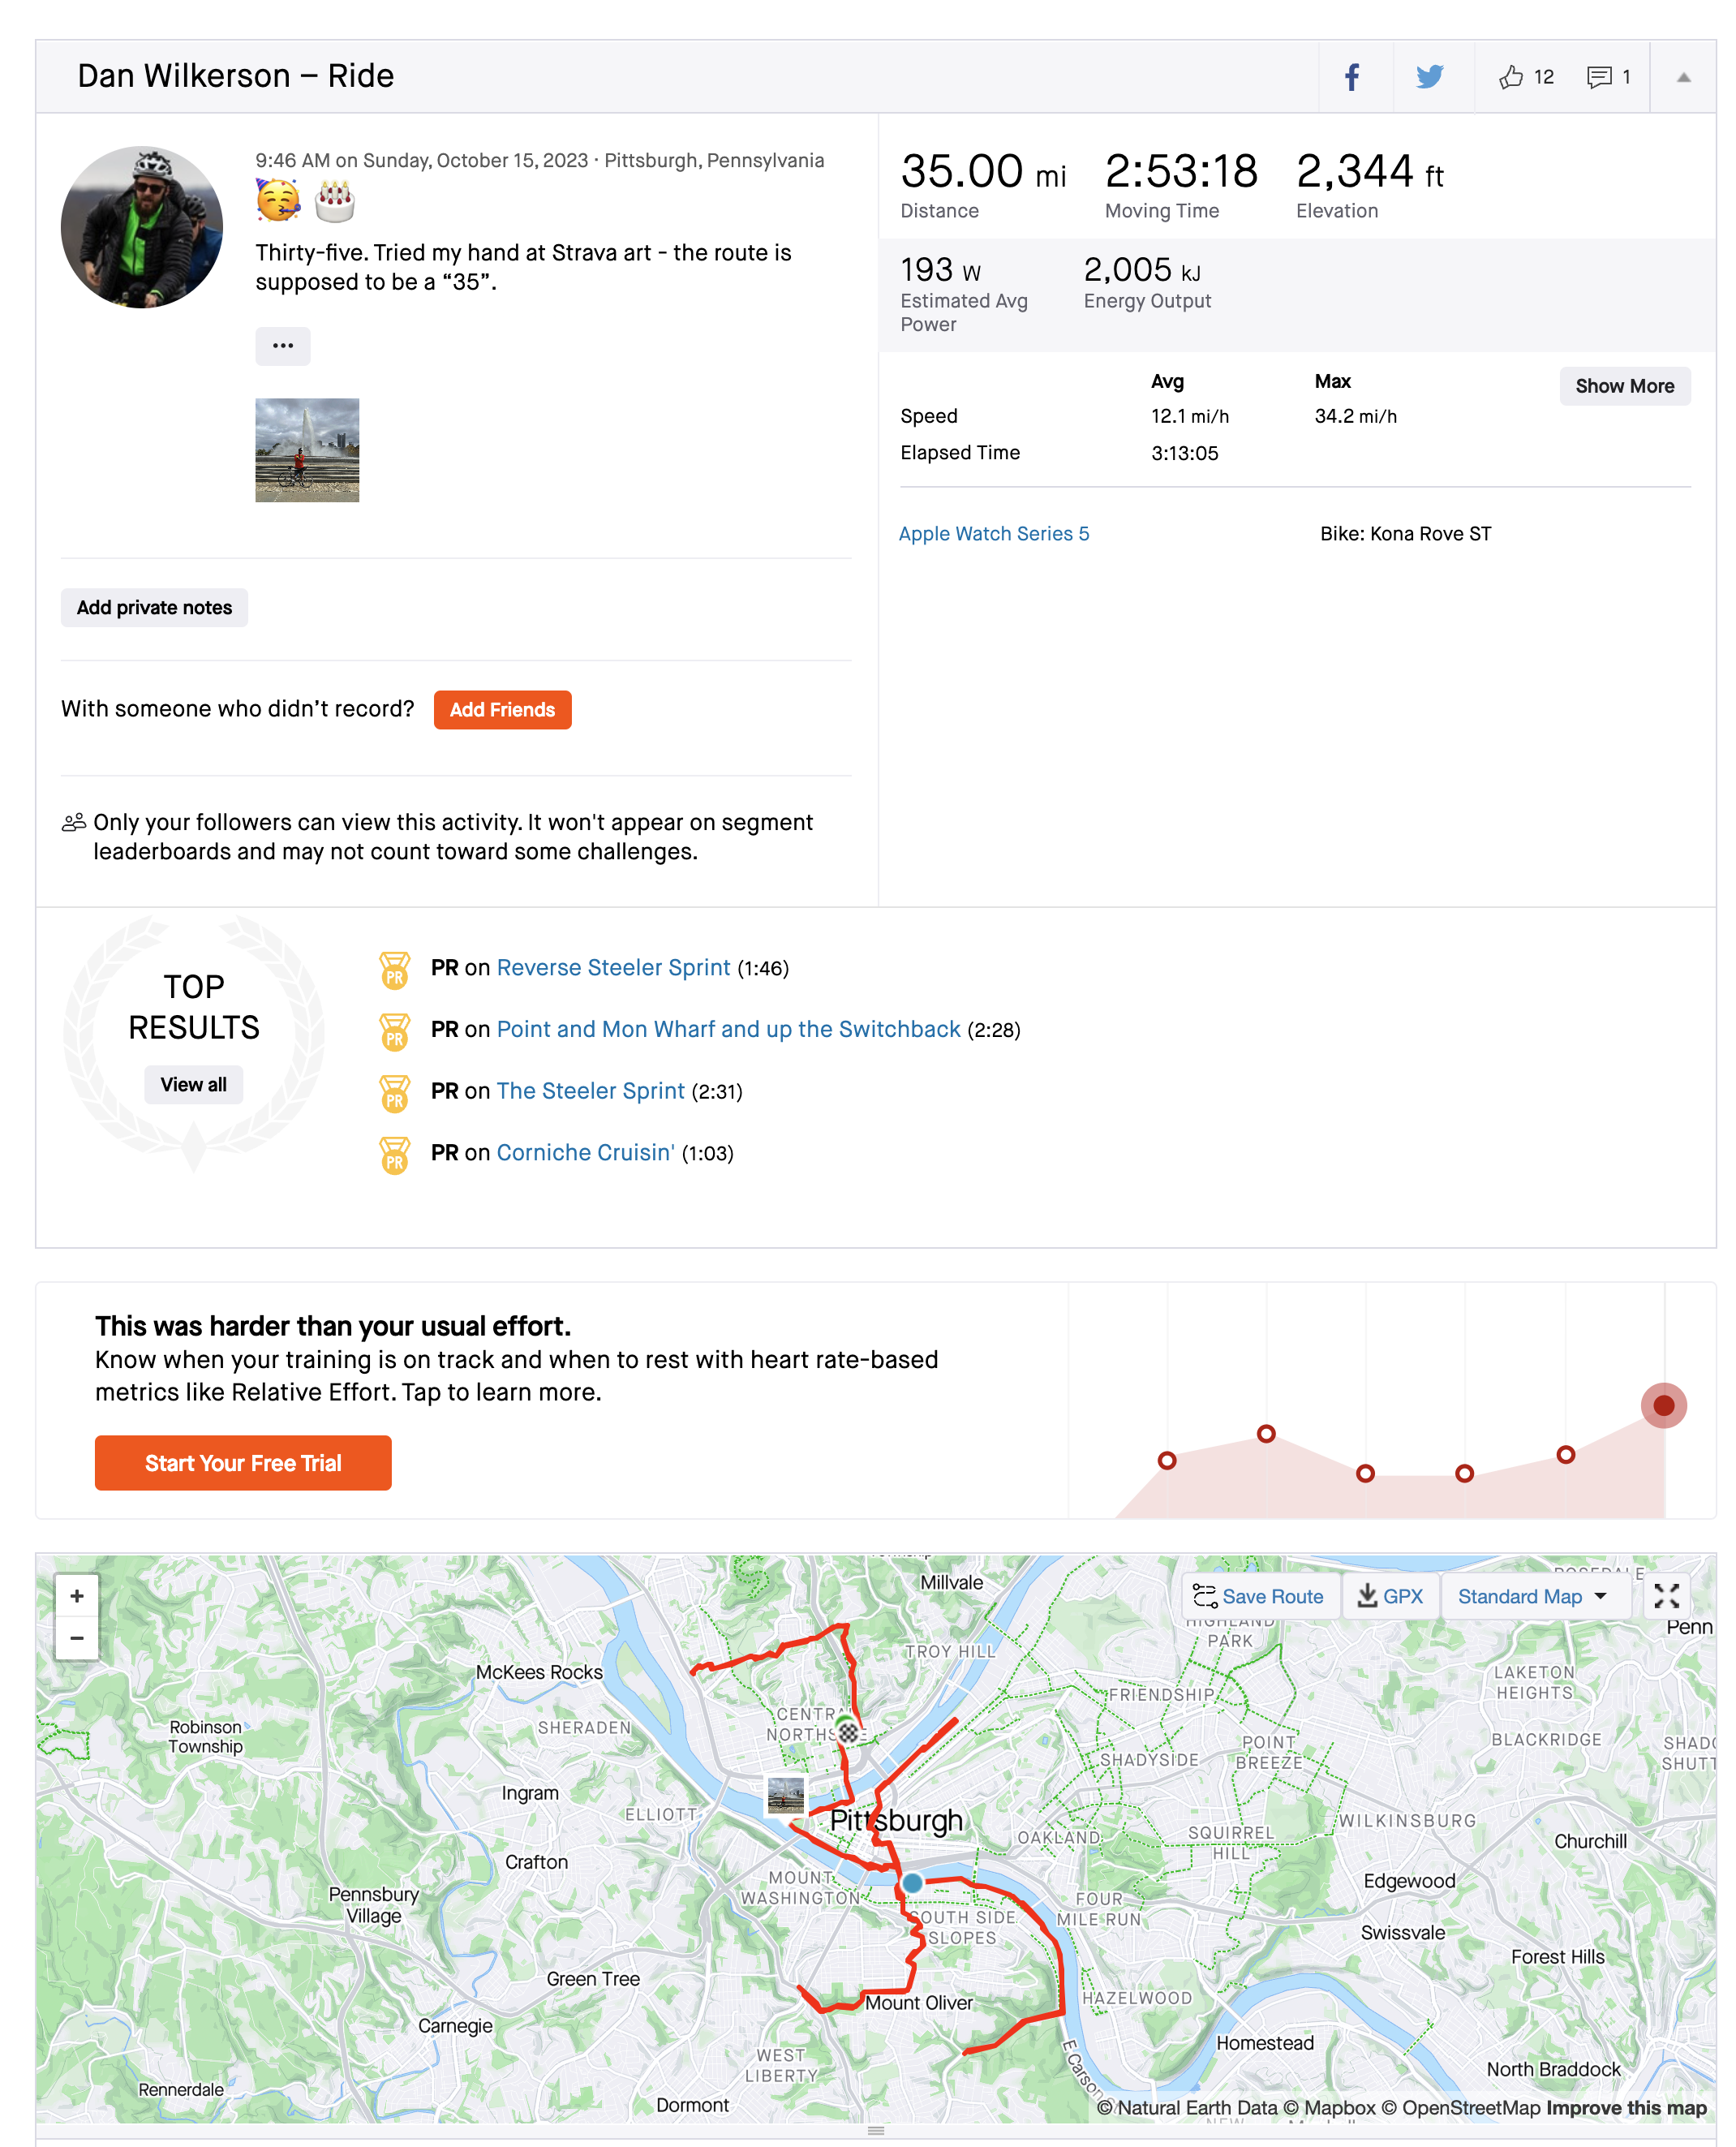 The Strava activity with the map and my mileage